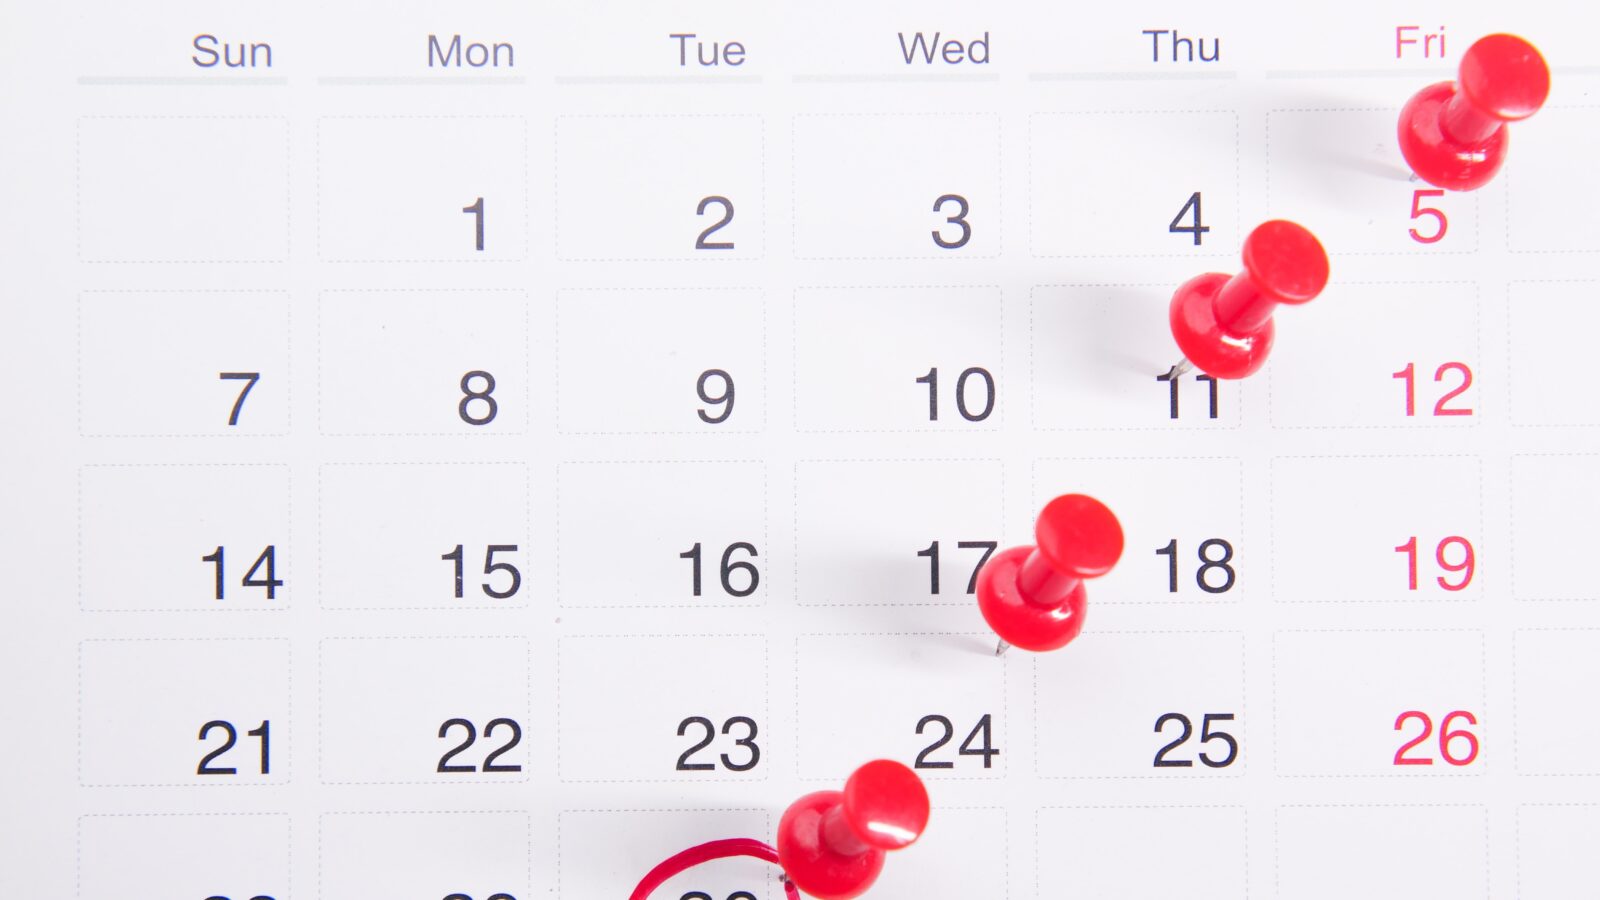 Calendar with marked days representing retroactive child support orders